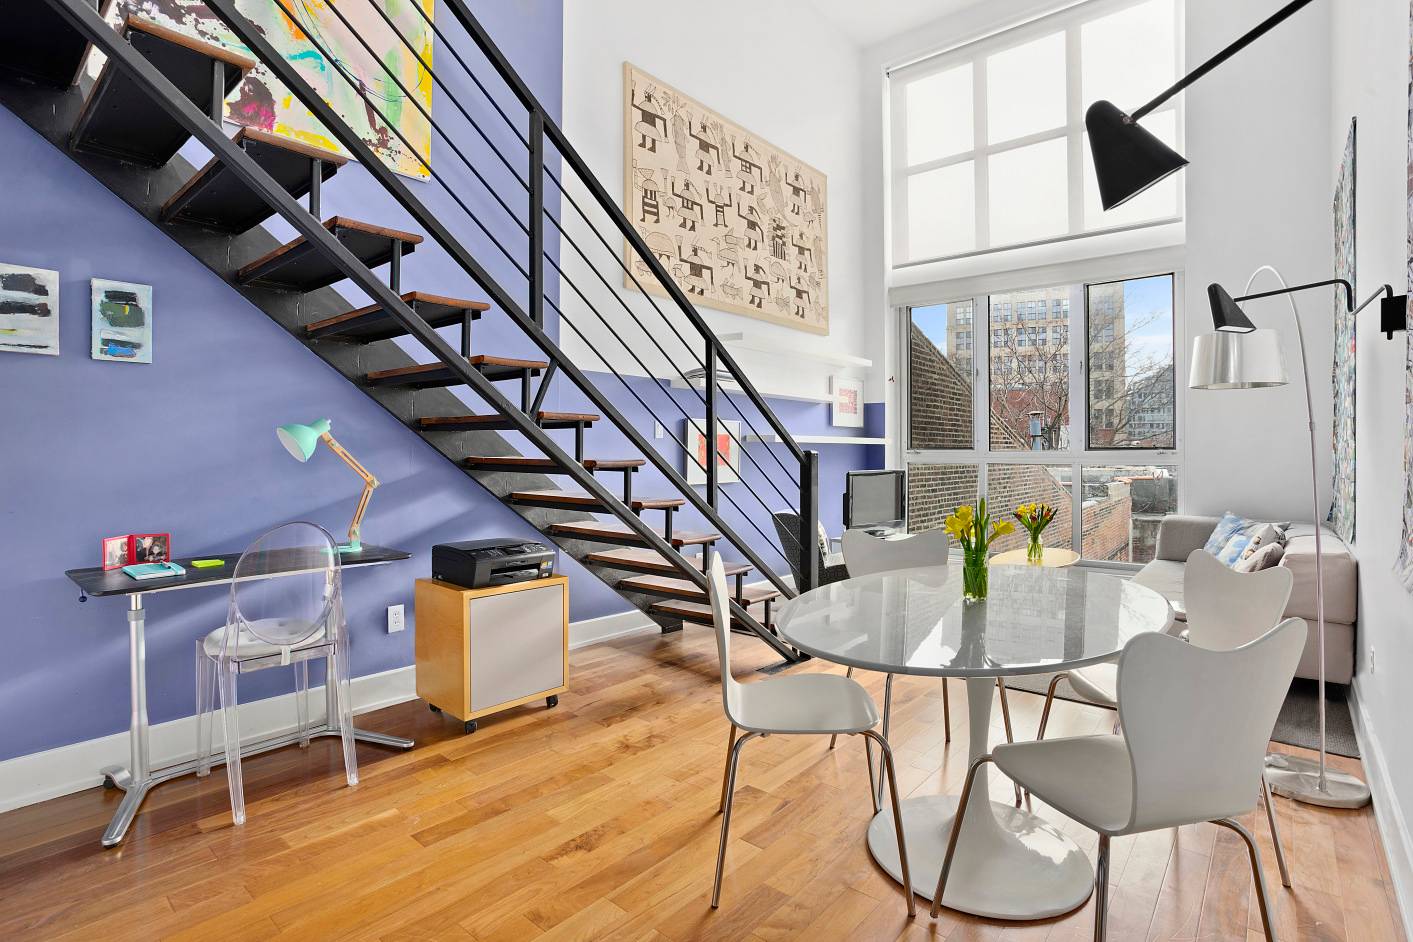 FURNISHED one bedroom loft in the heart of Williamsburg.